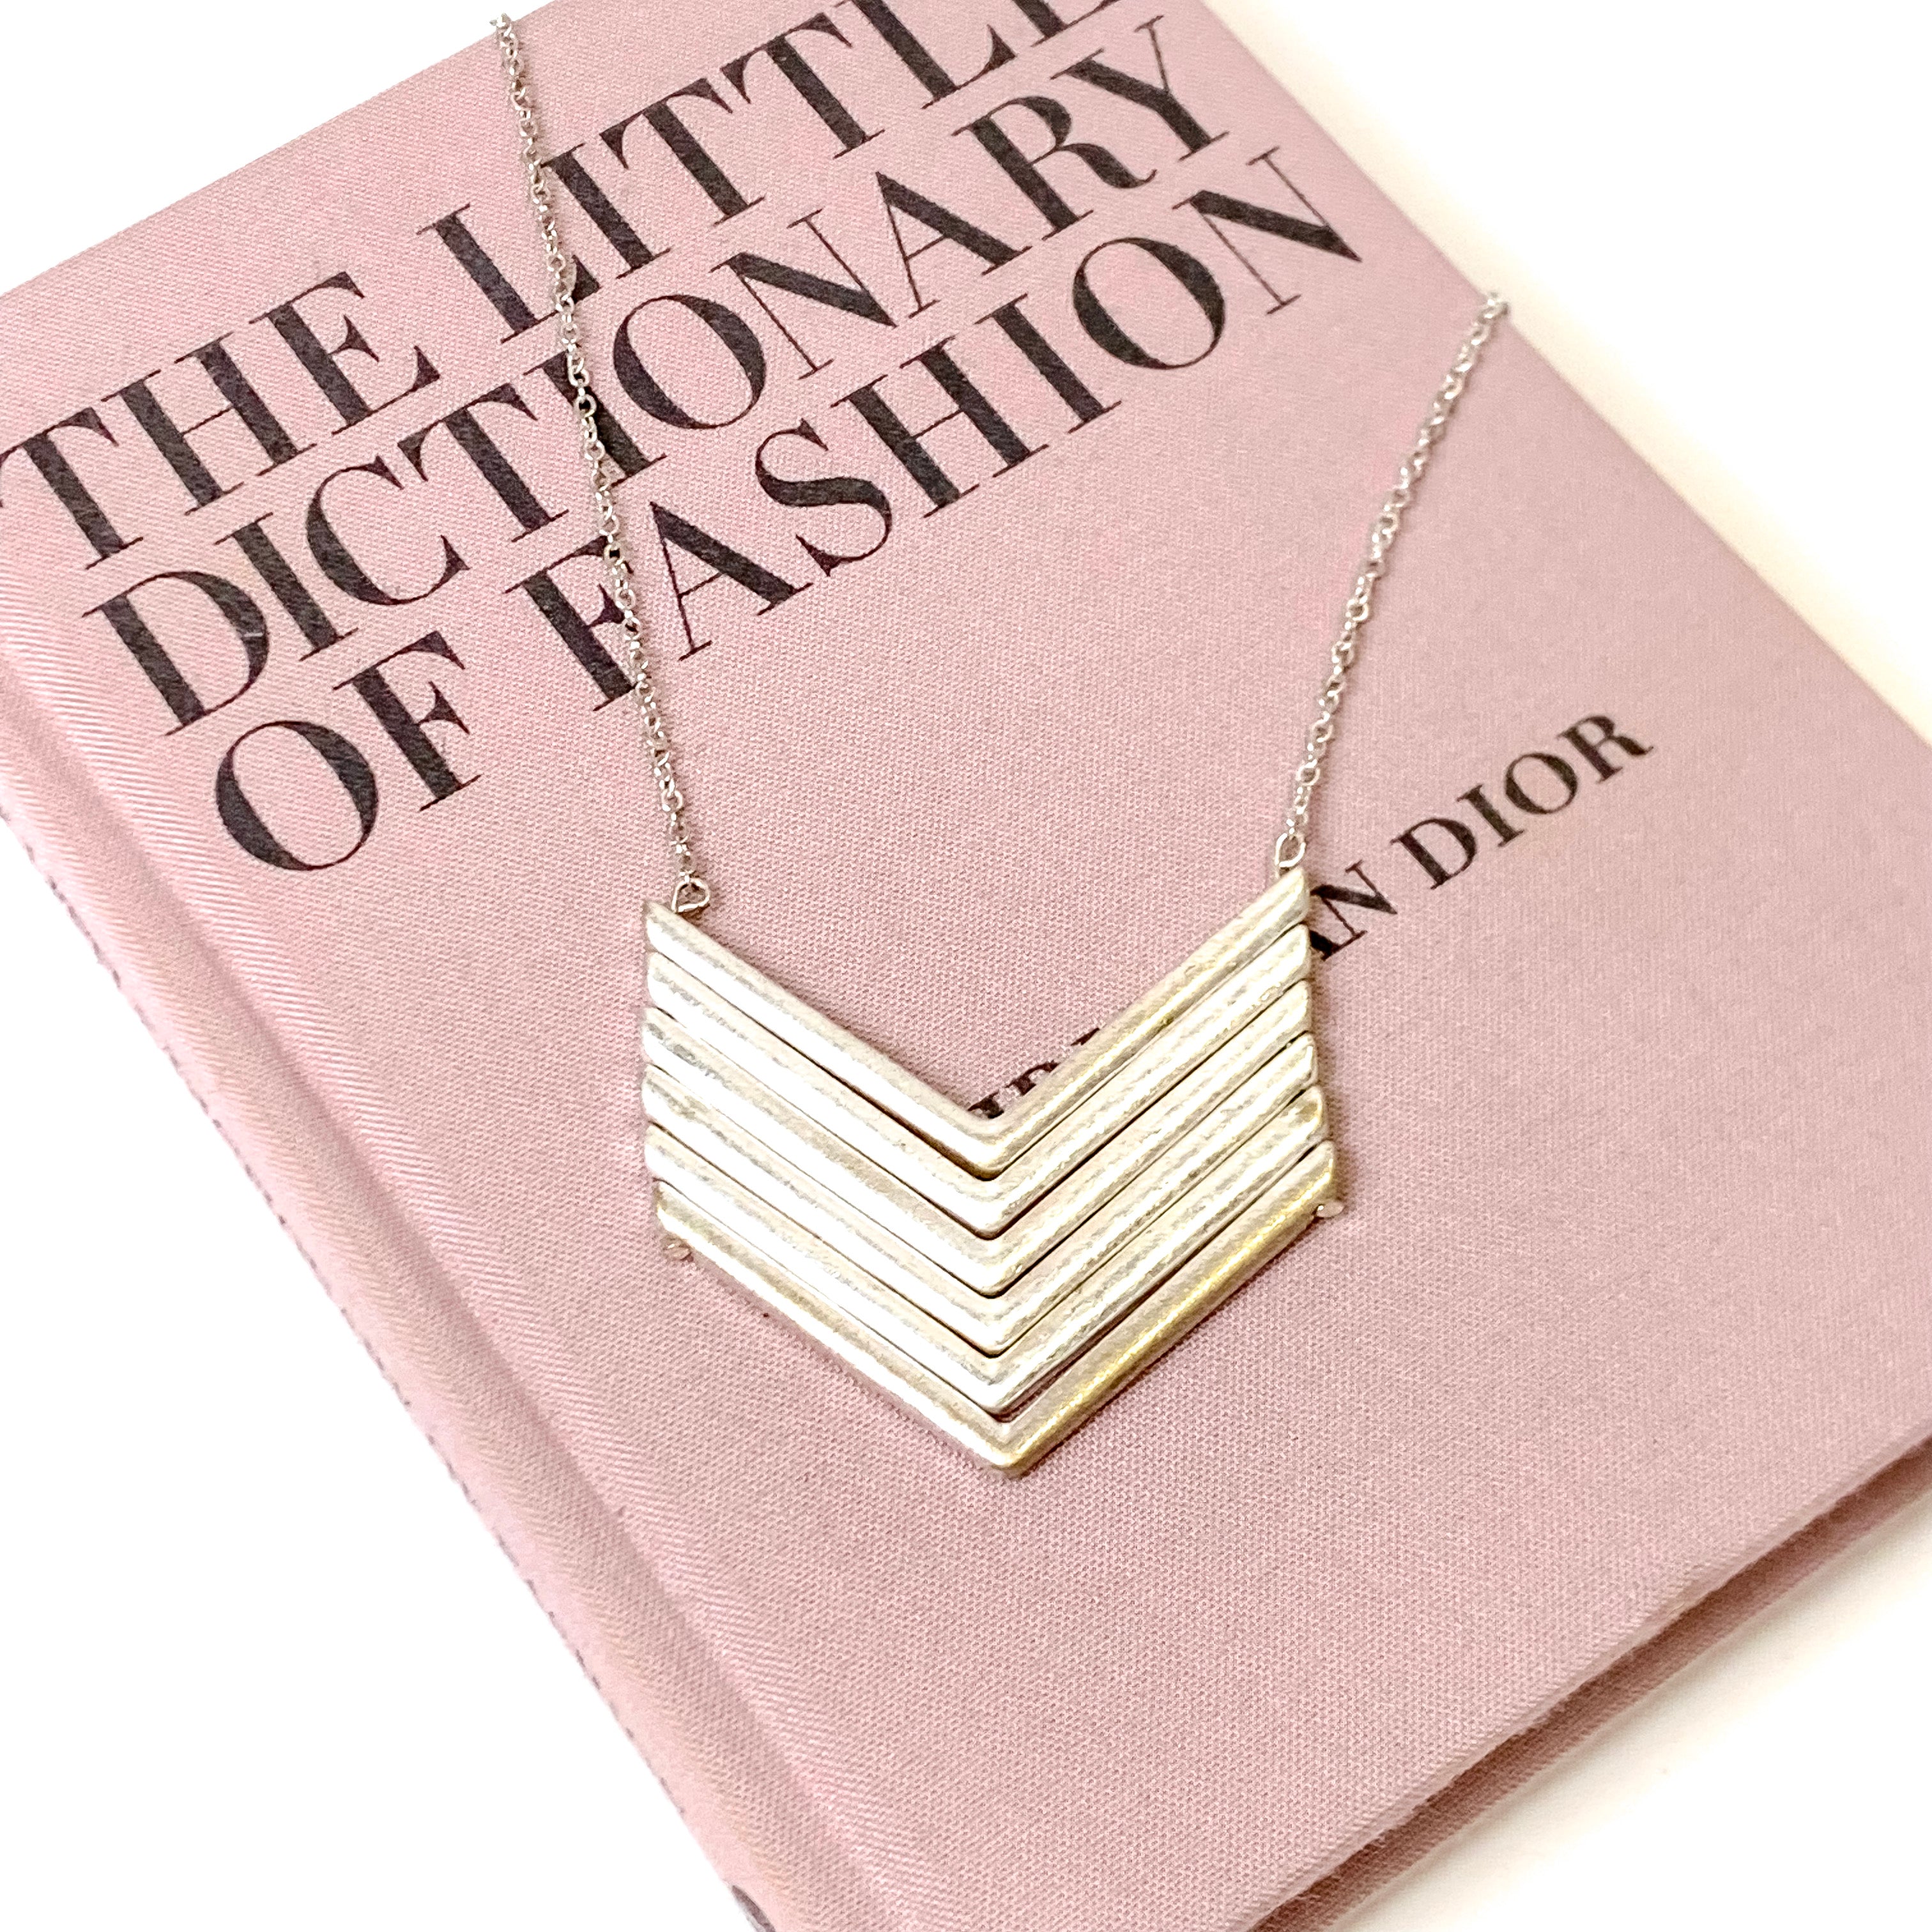 Long Silver Tone Necklace with Chevron Pendant - Giddy Up Glamour Boutique